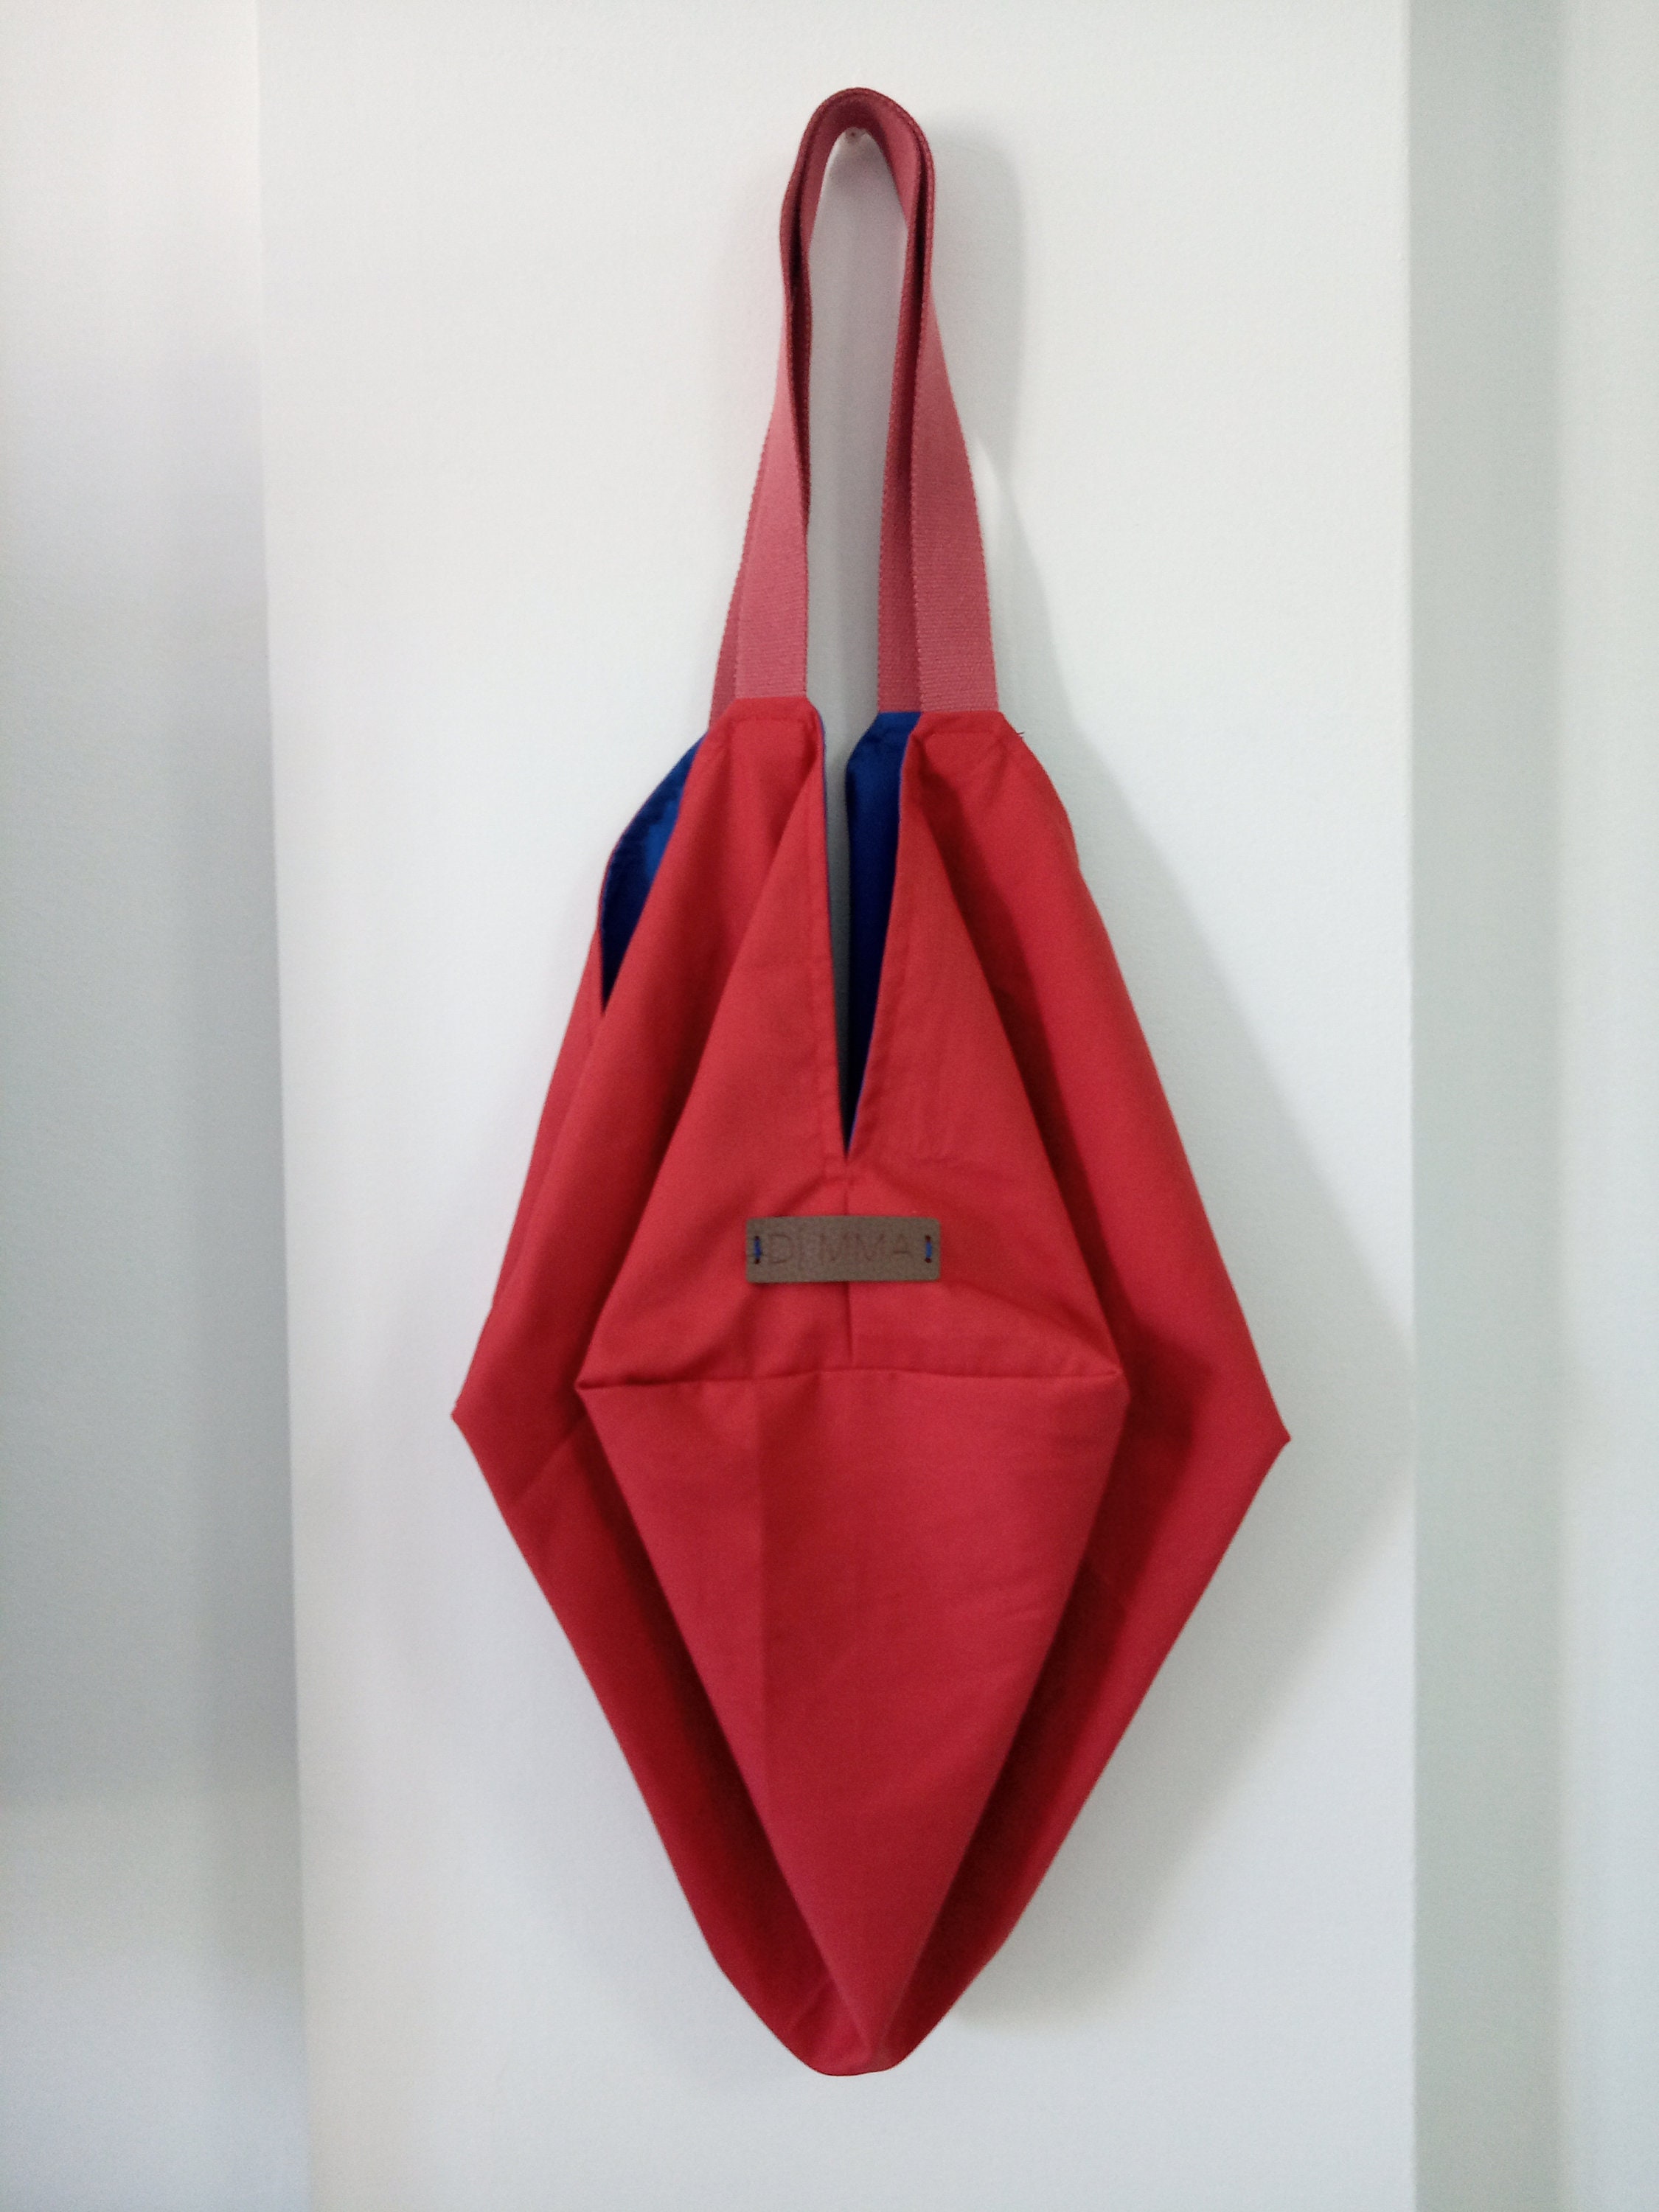 Make Your Own Origami Tote Bag